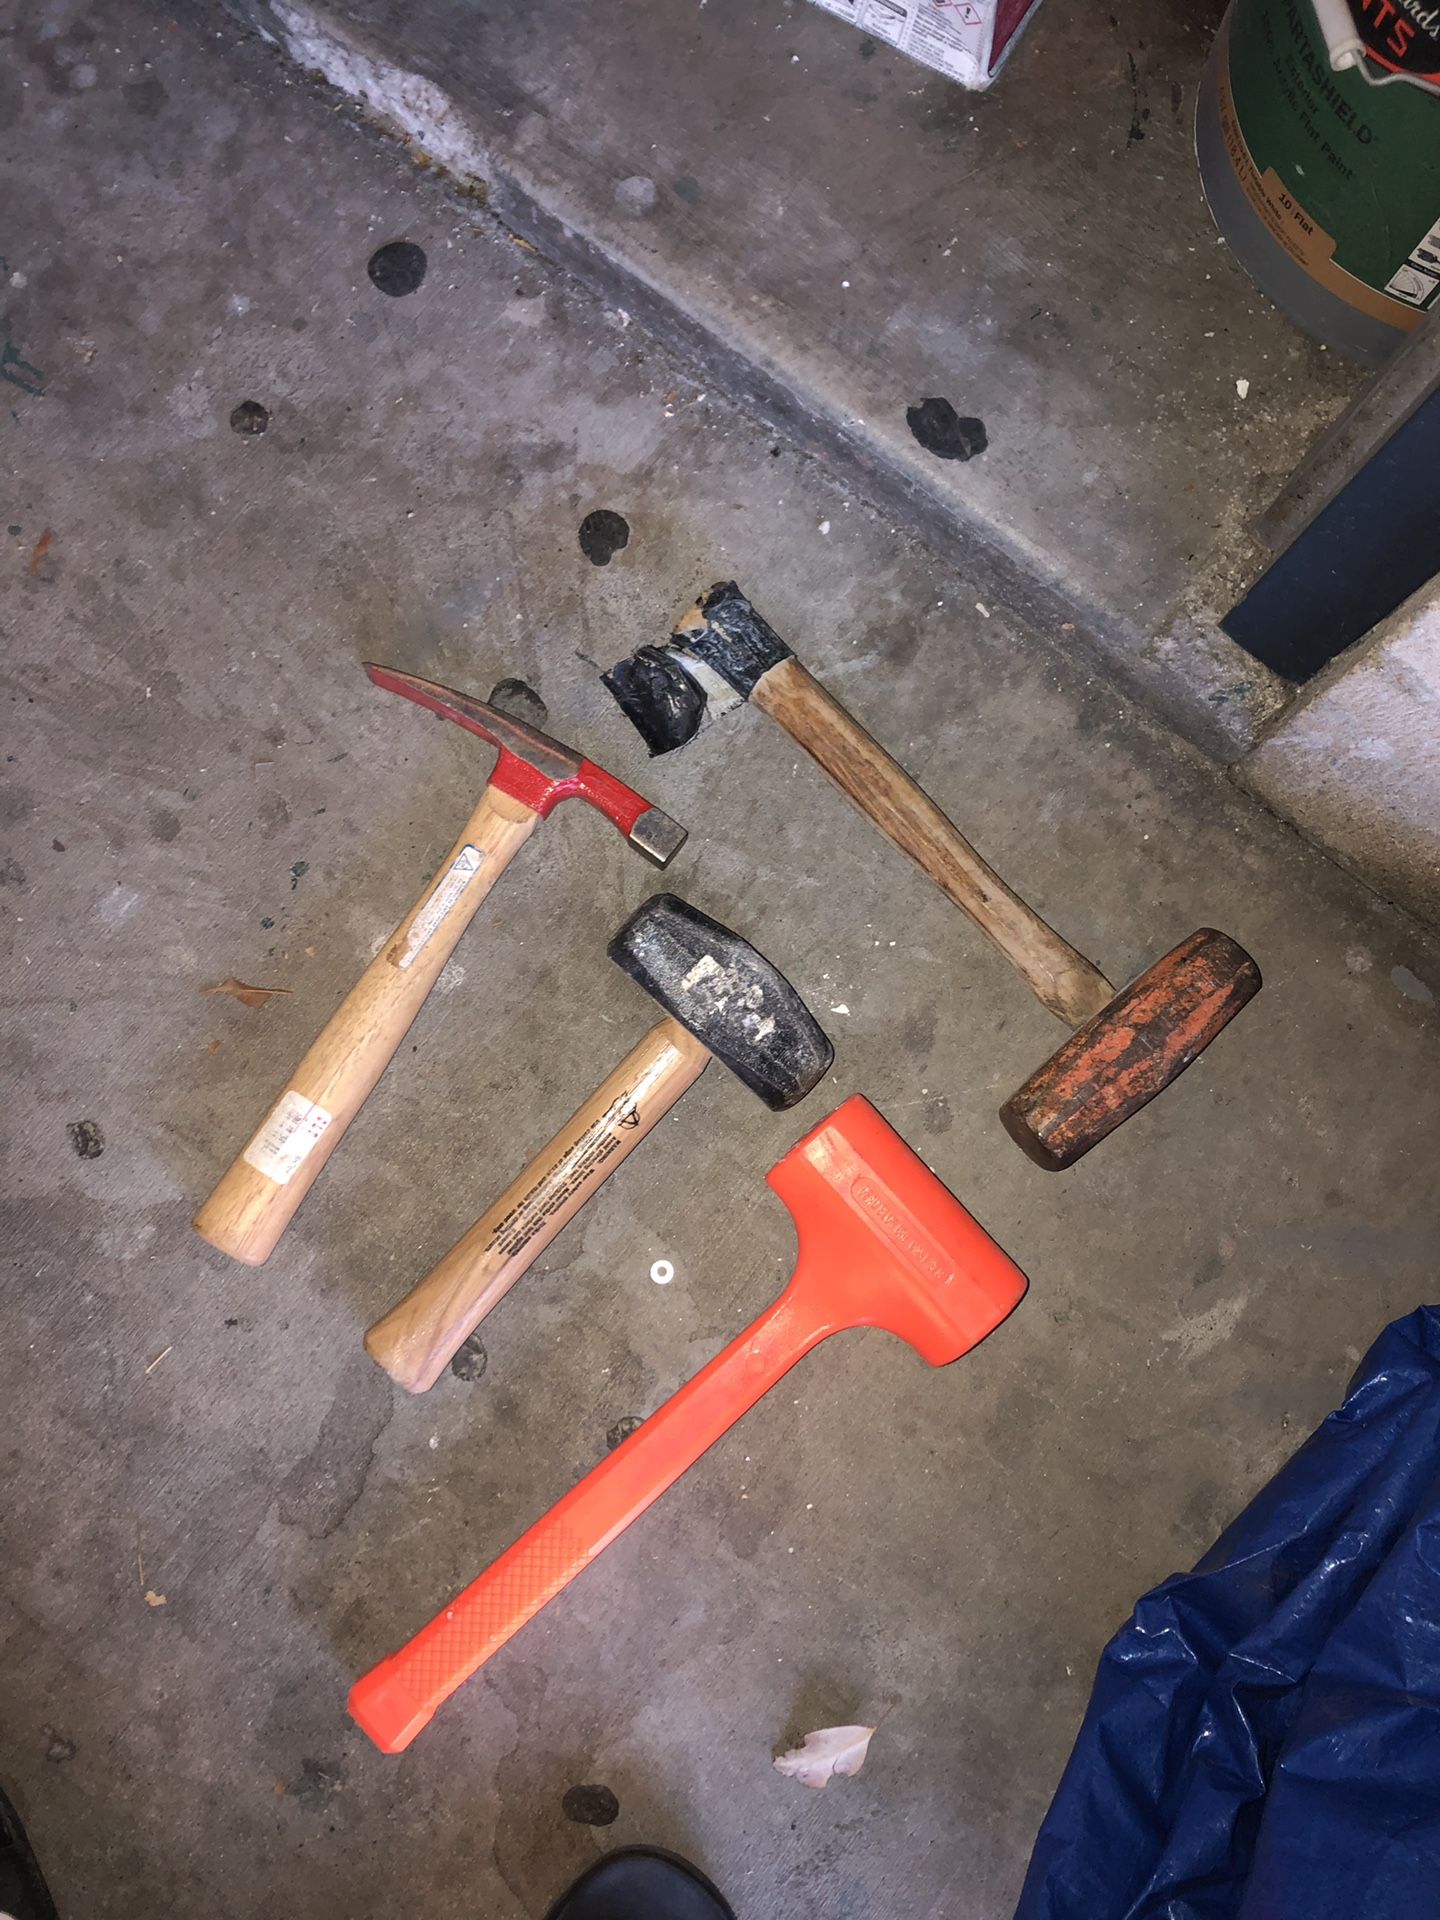 Tools $30 for all